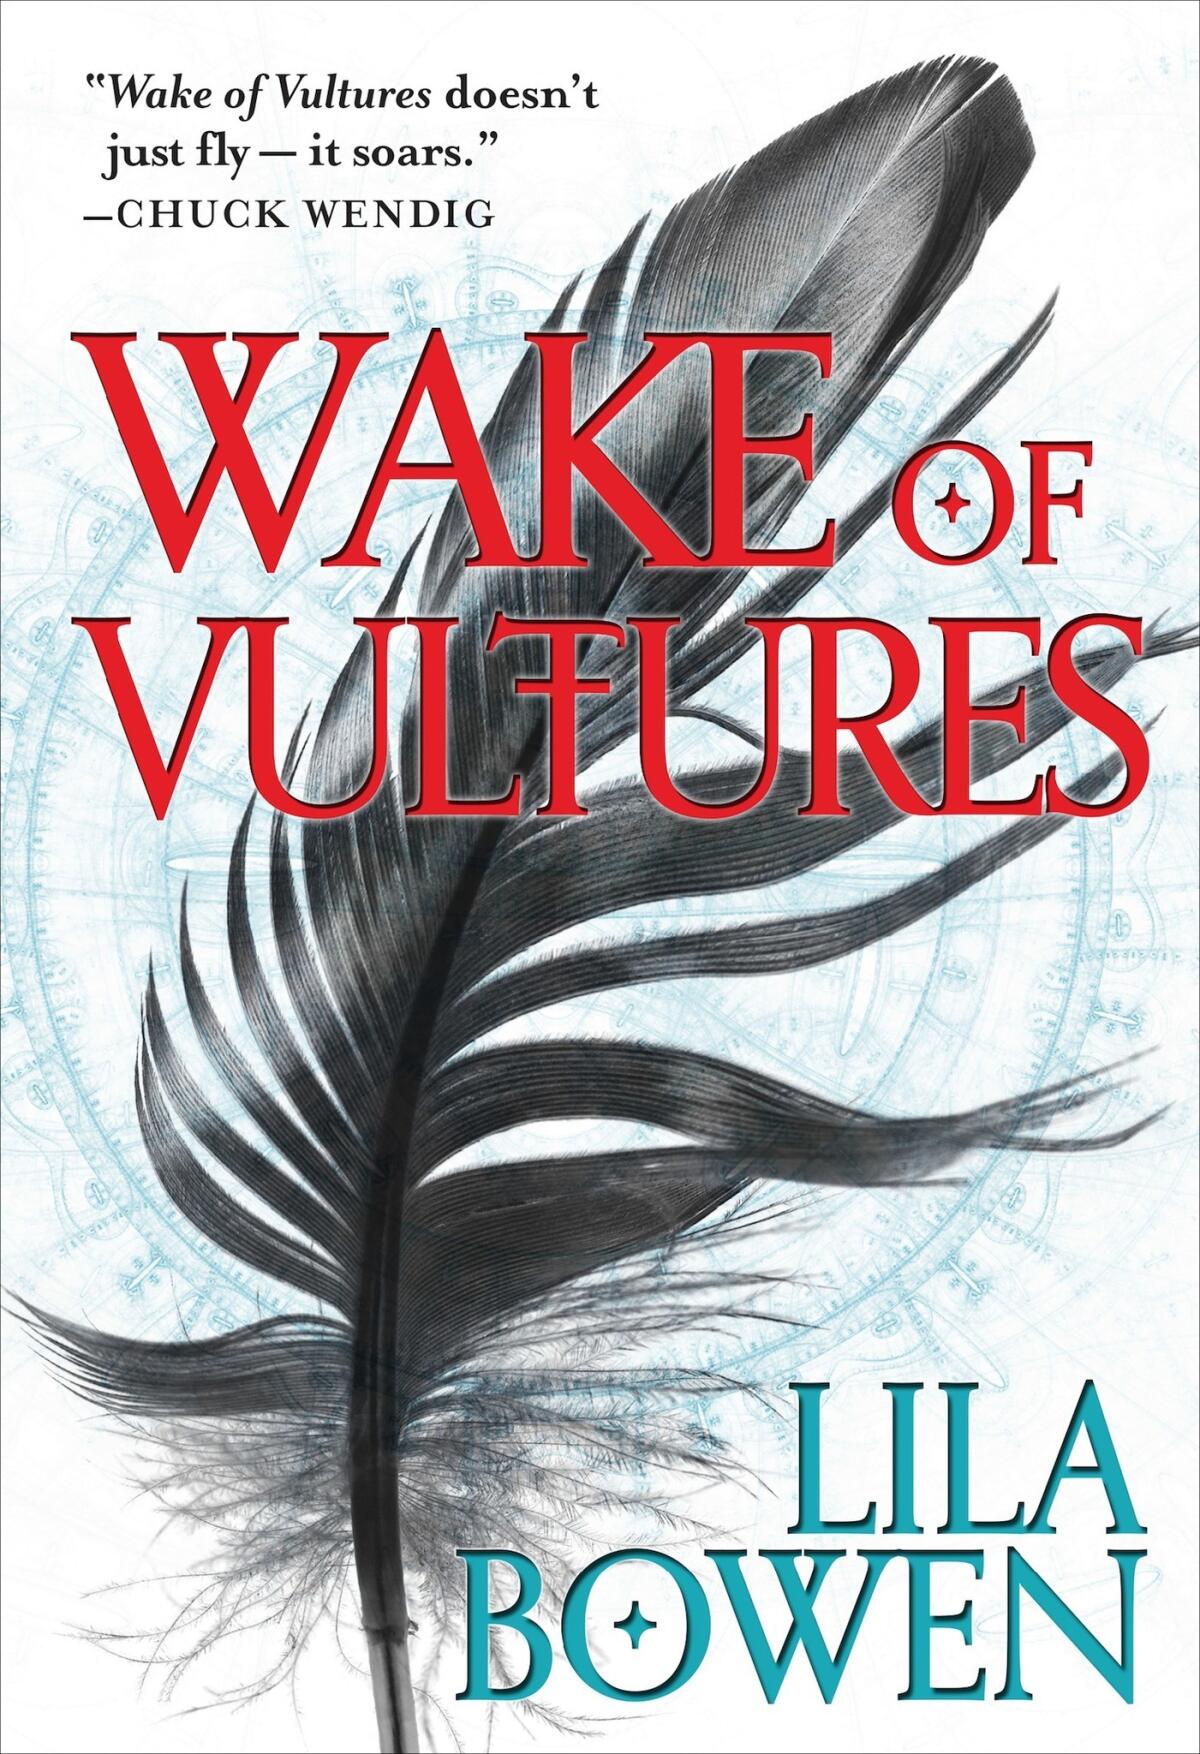 "Wake of Vultures" by Lila Bowen